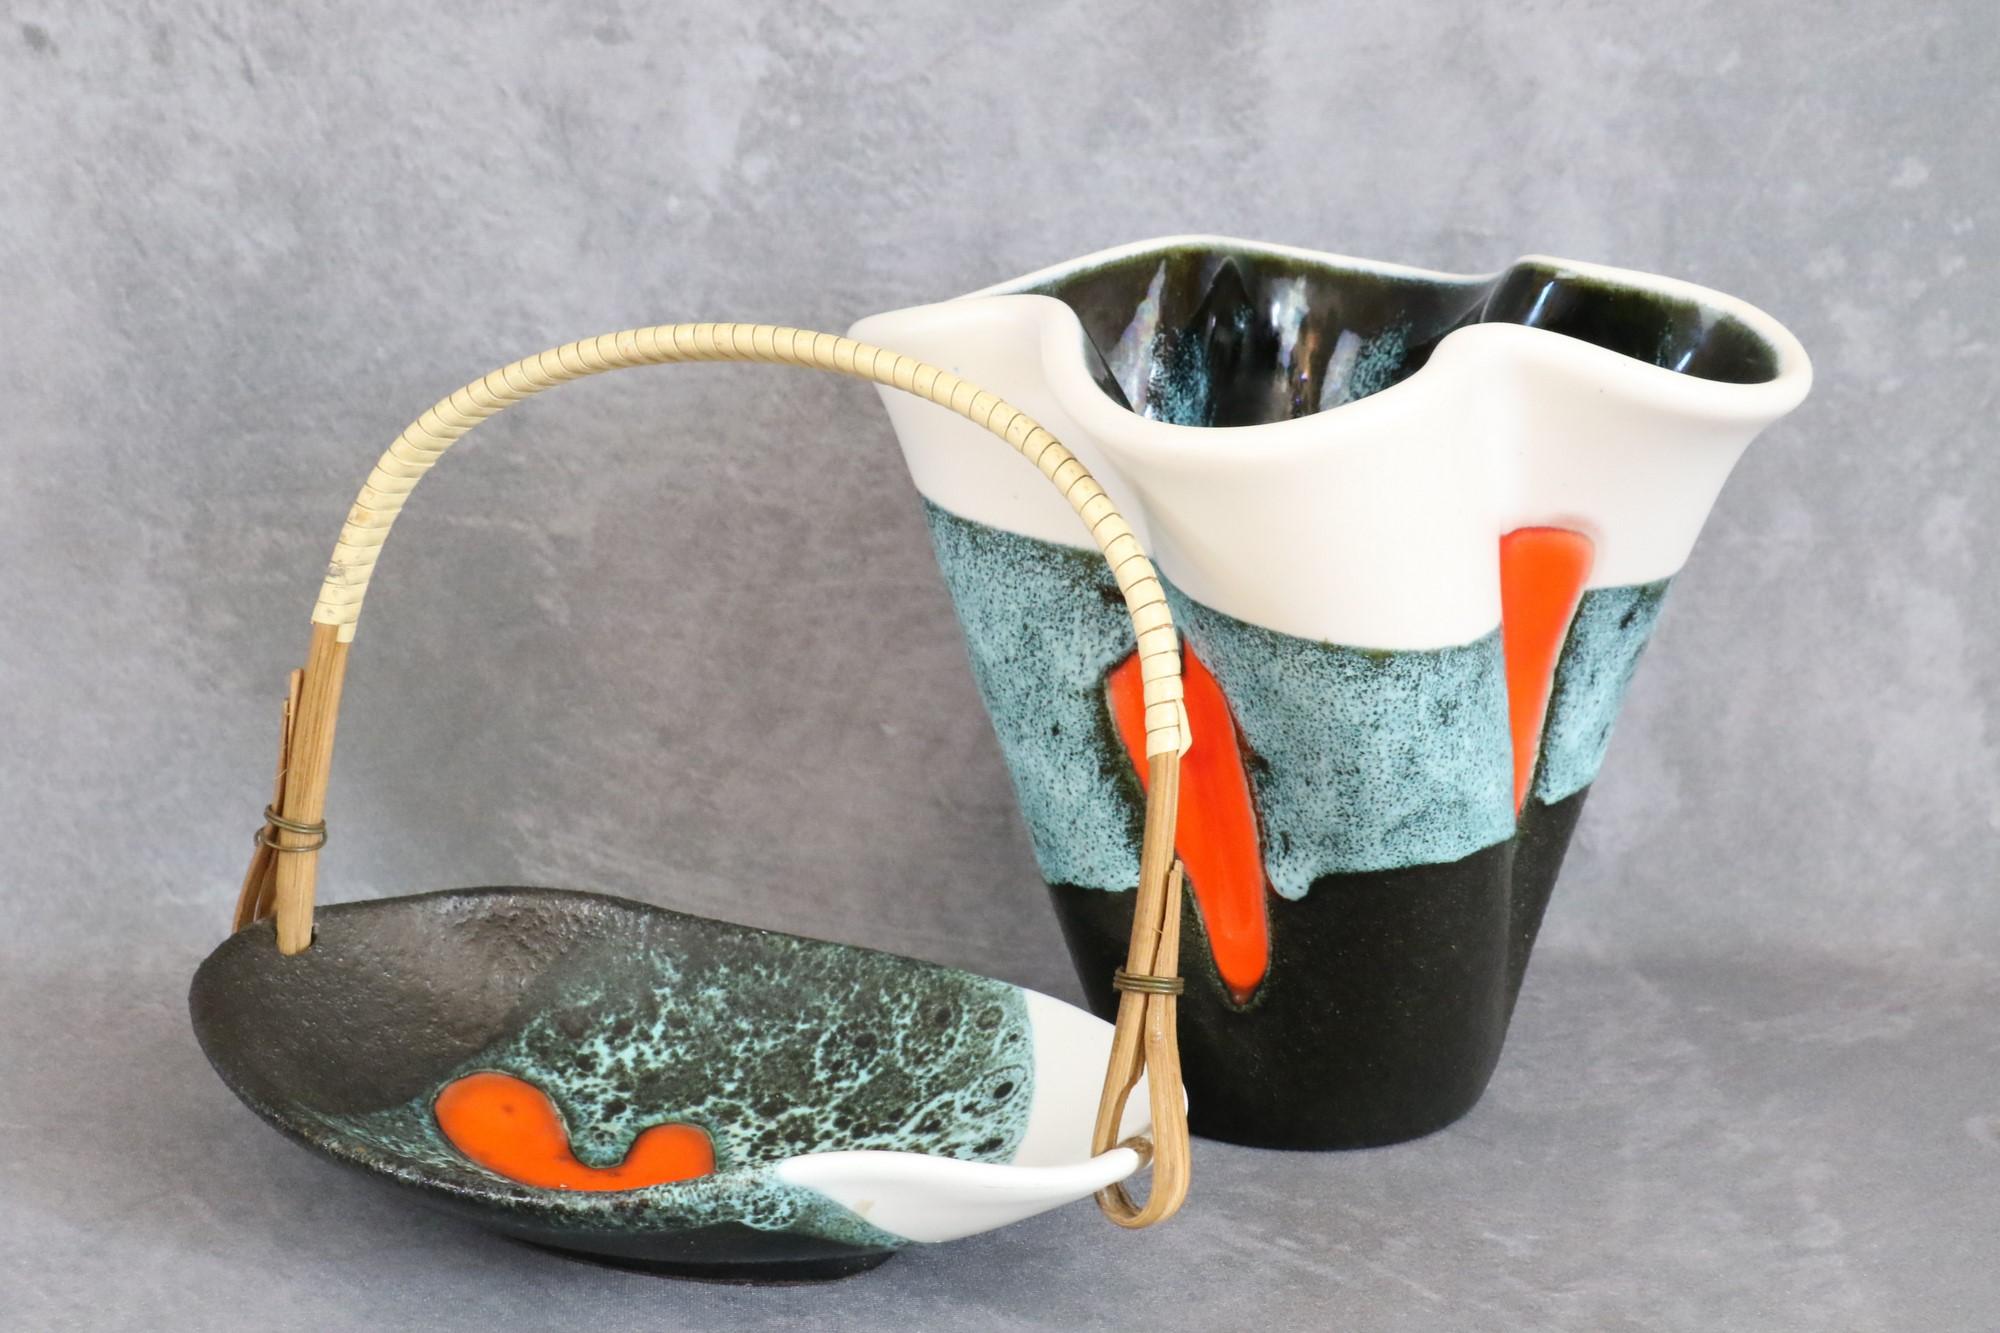 Set of Mid-Century Modern French ceramic by Elchinger, 1950's, vase Vide poche.

One earthenware vase and one vide poche with enameled decorations of deep orange patches. The background ranges from white to charcoal gray and speckled blue. There